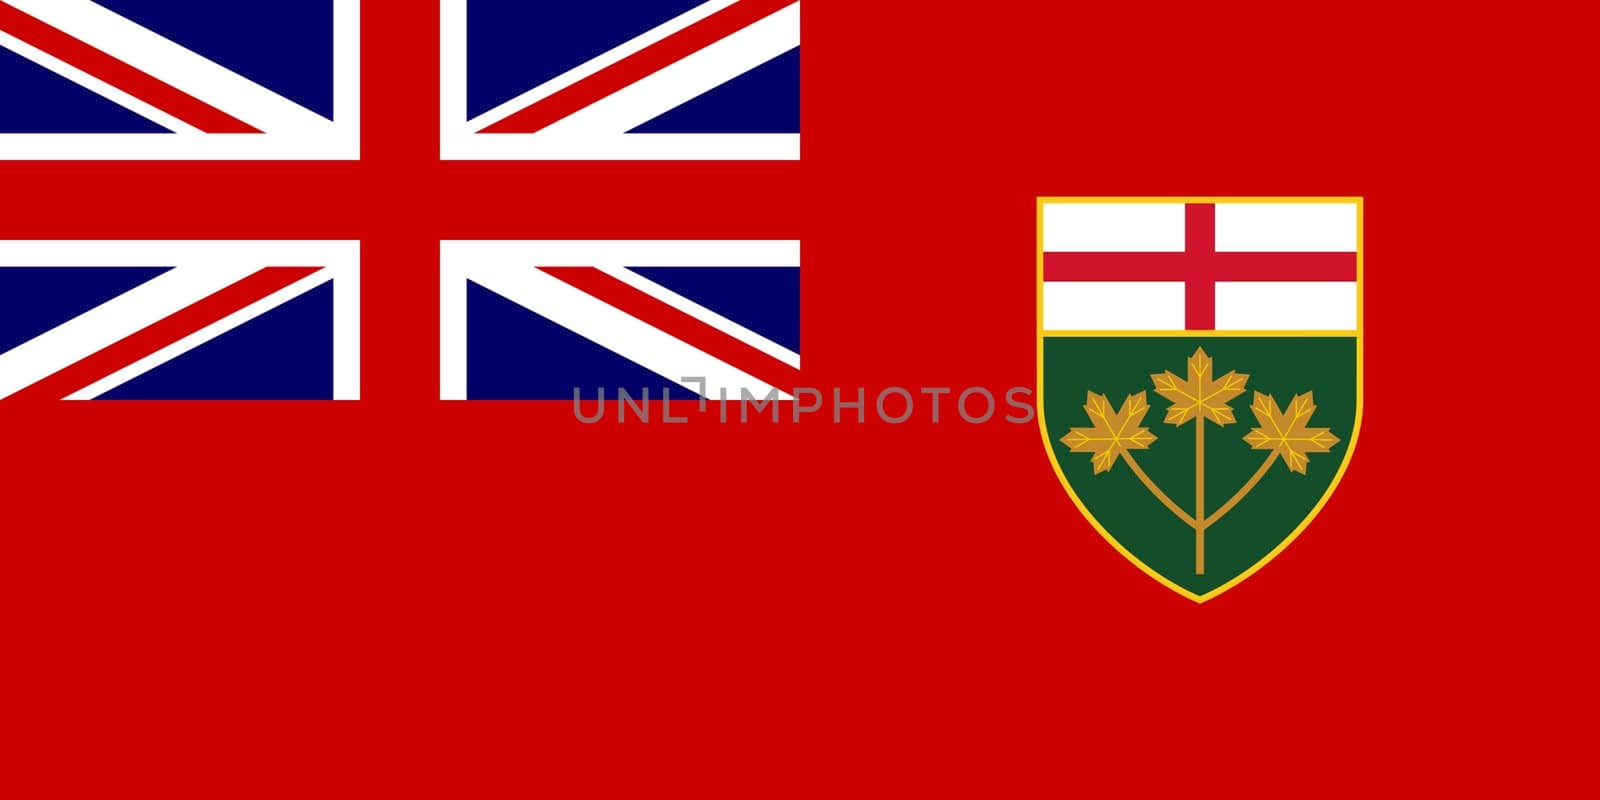 Ontario State Flag by speedfighter